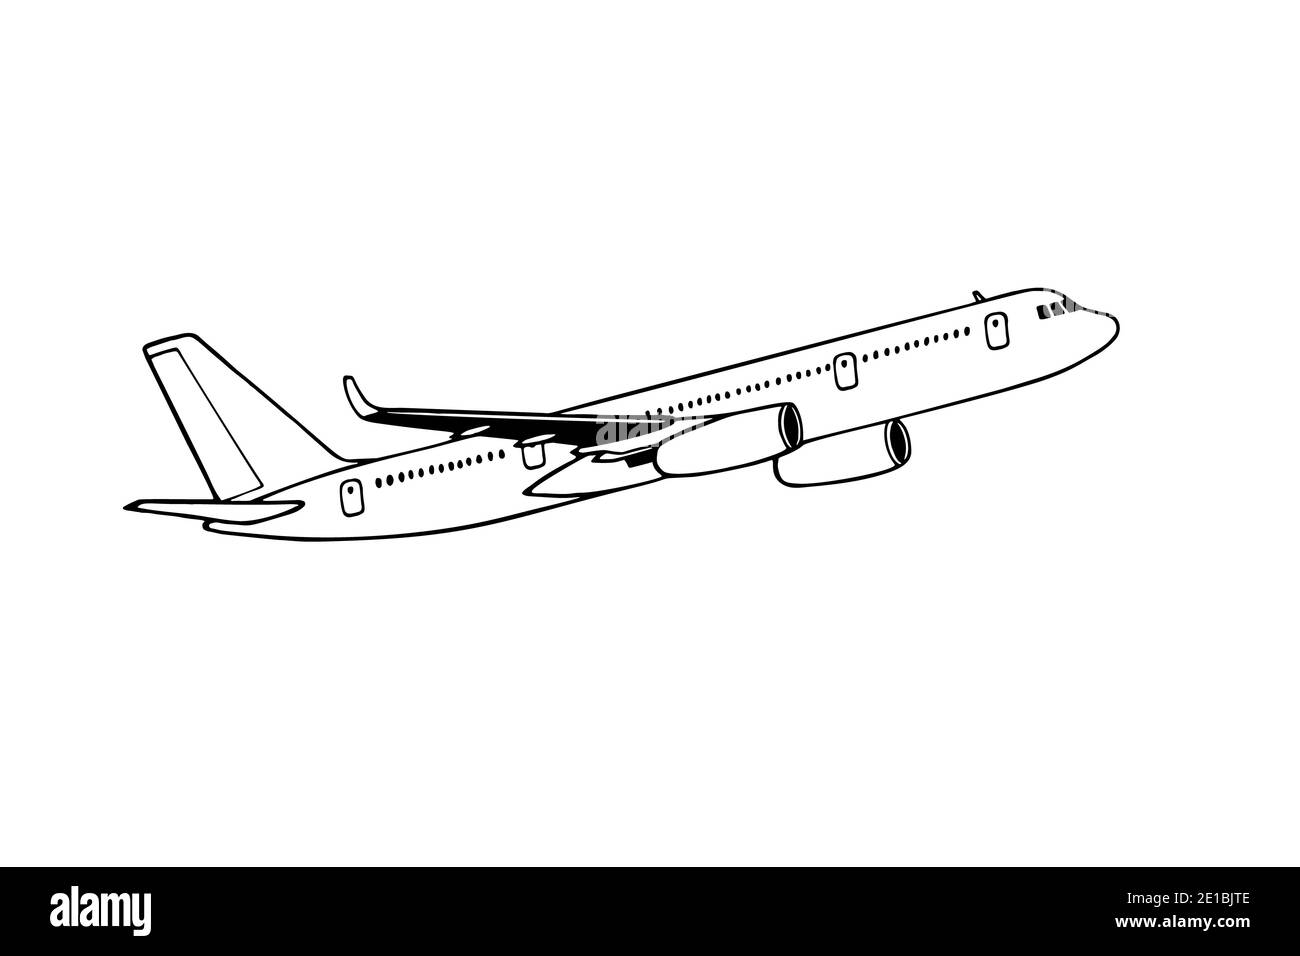 Sketch of an airplane in flight 2 Explore the problem To compare the   Download Scientific Diagram